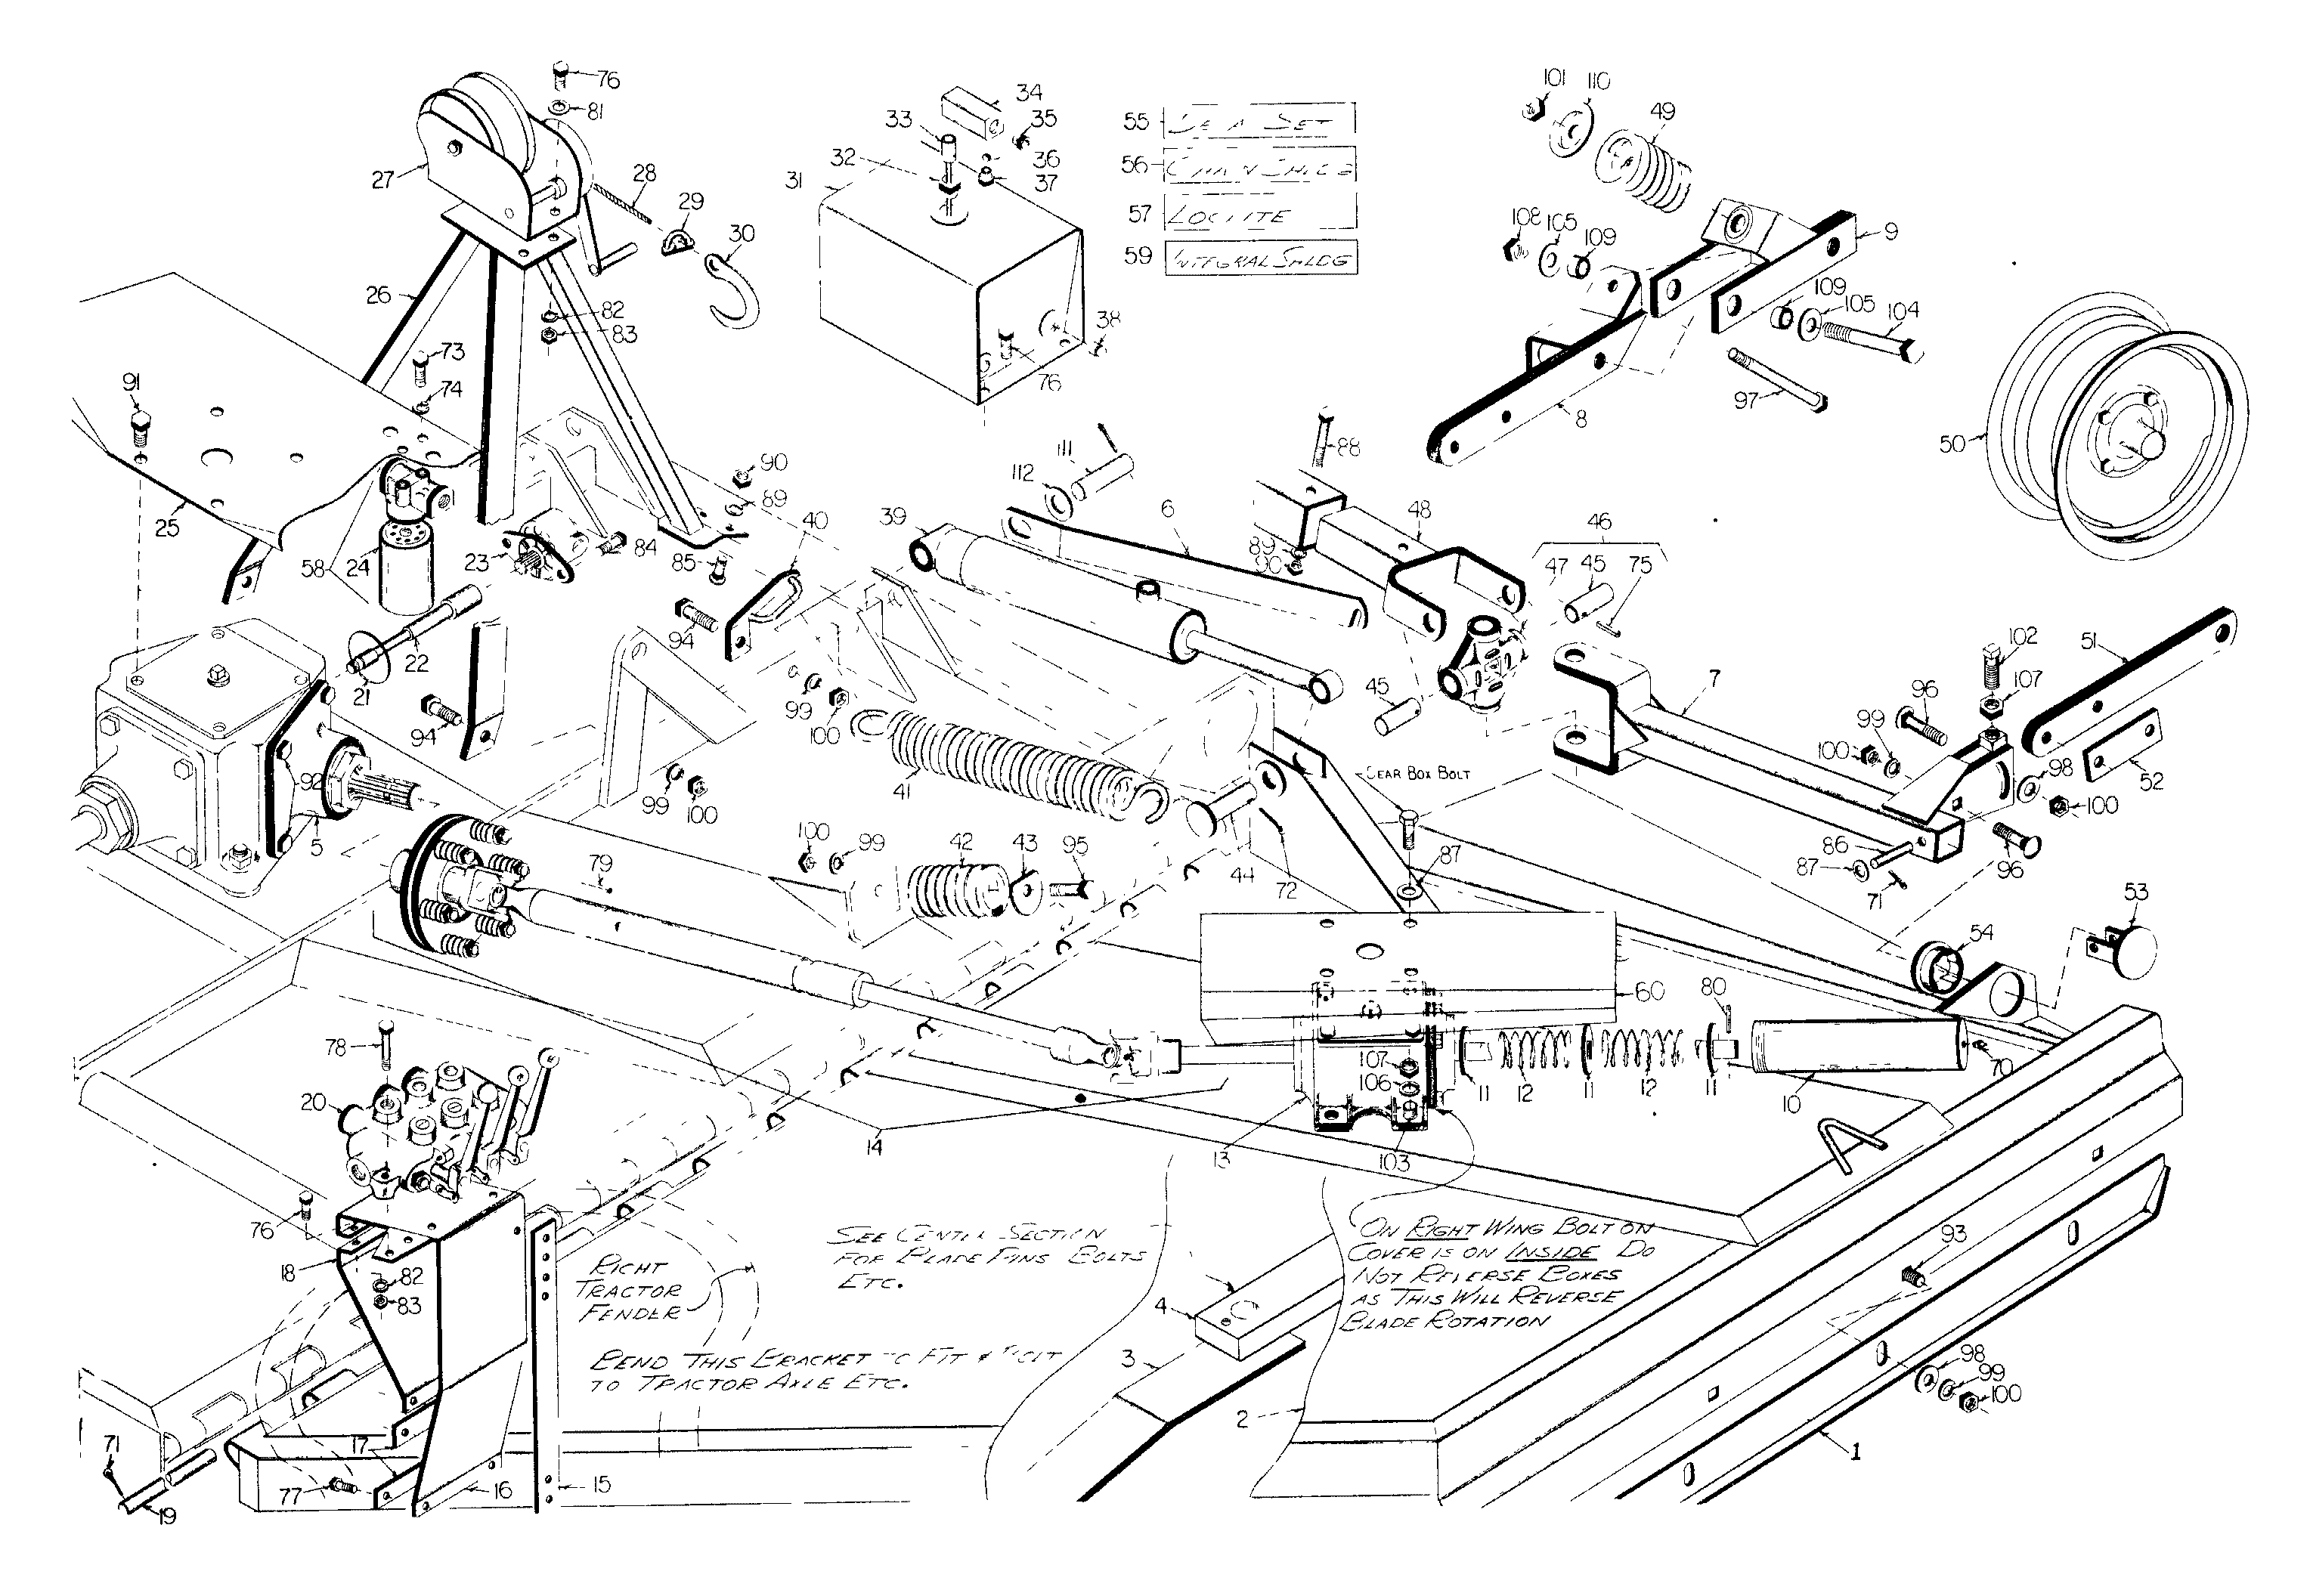 Woods Mower Parts Diagrams Woods 2126 Rotary Cutter Parts Diagram 1001 Best Wood Inspiration